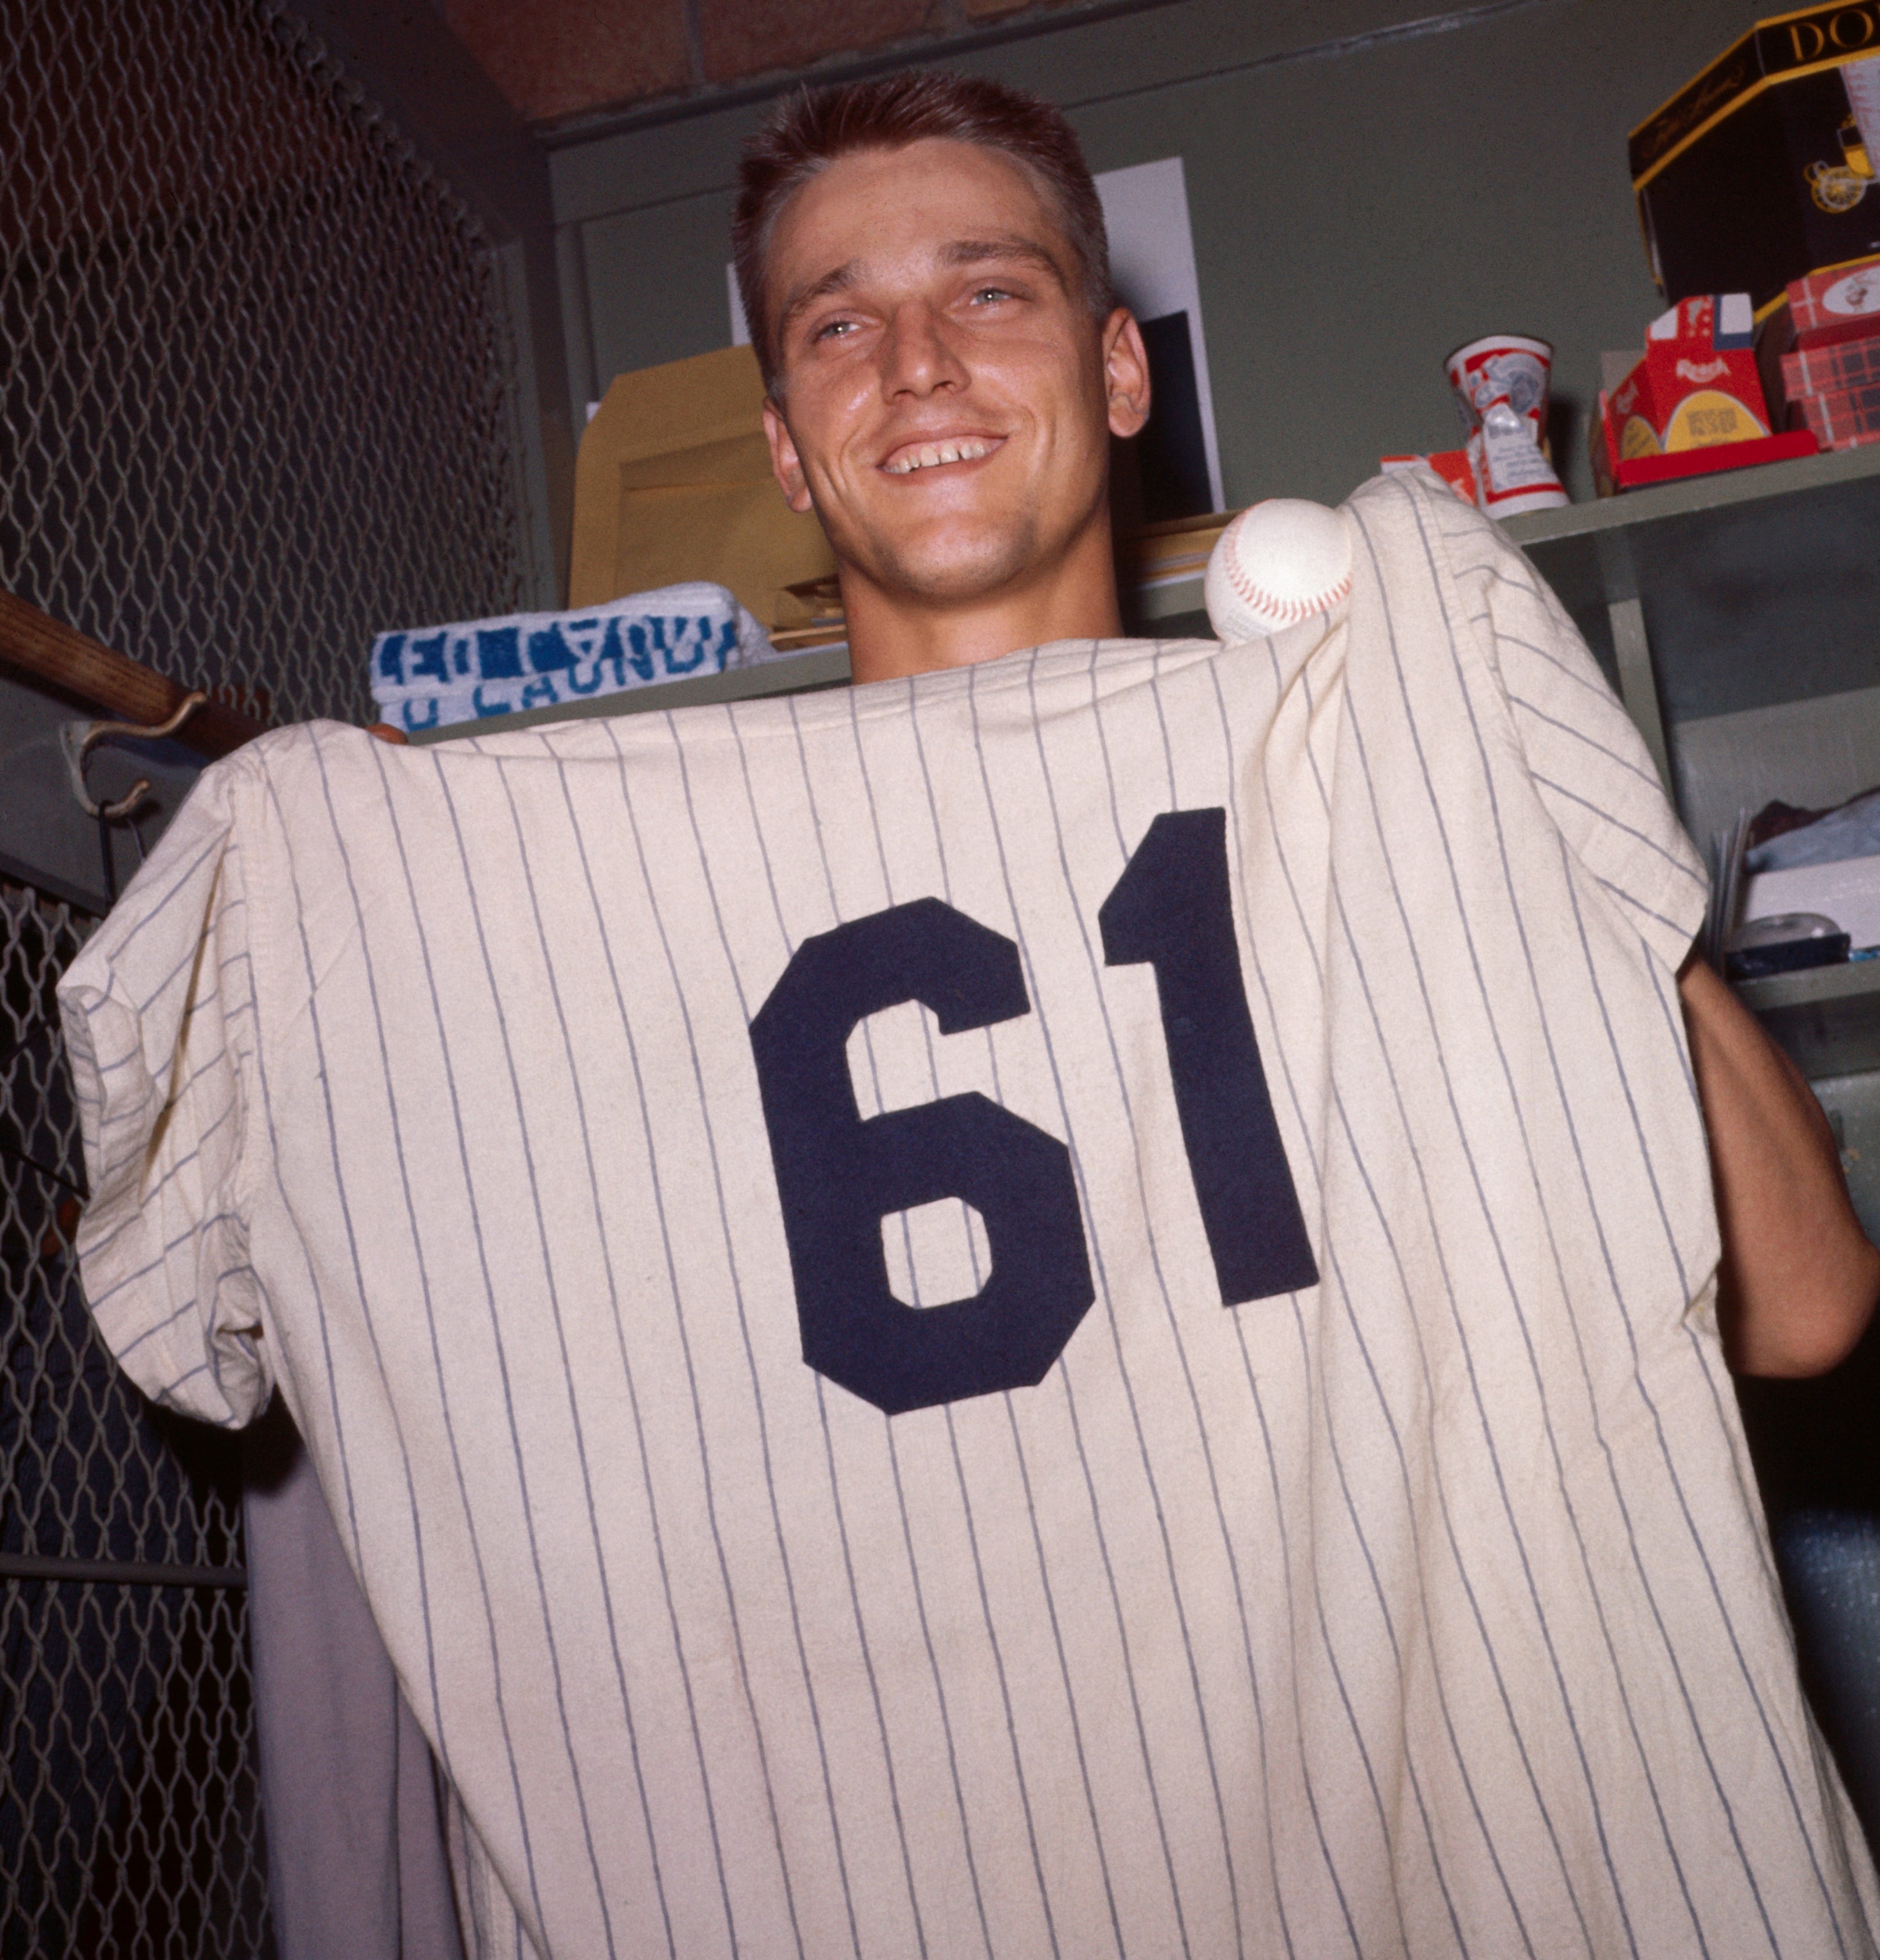 Hall of Fame Candidate No. 14: Roger Maris